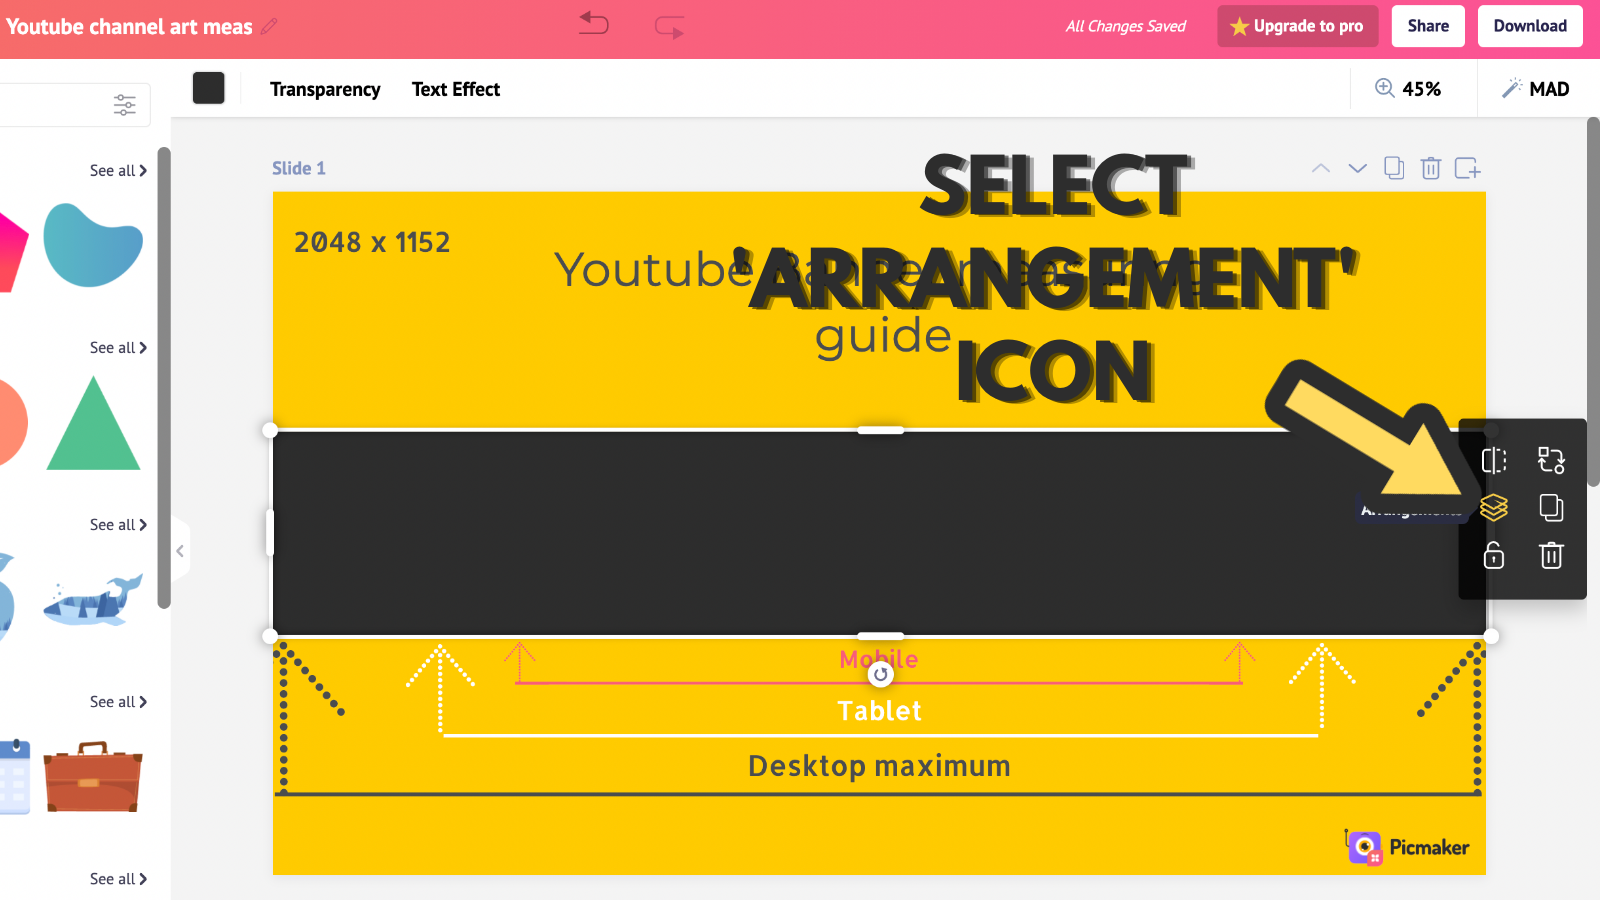 Screenshot that asks you to select arrangement icon (to make YouTube banner)